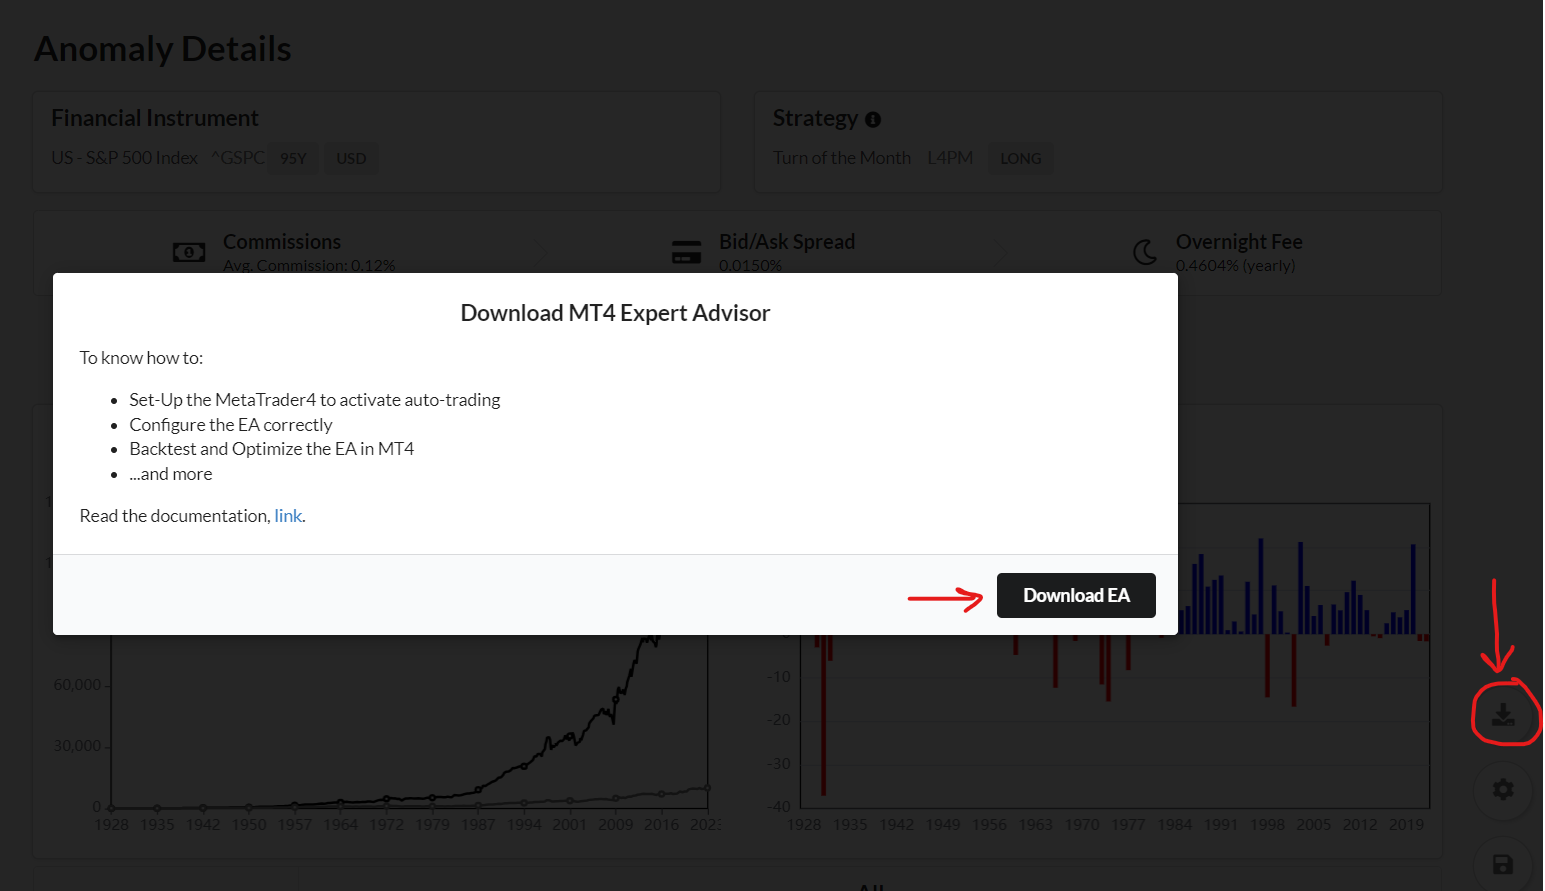 How to download Expert Advisors from ForecastCycles